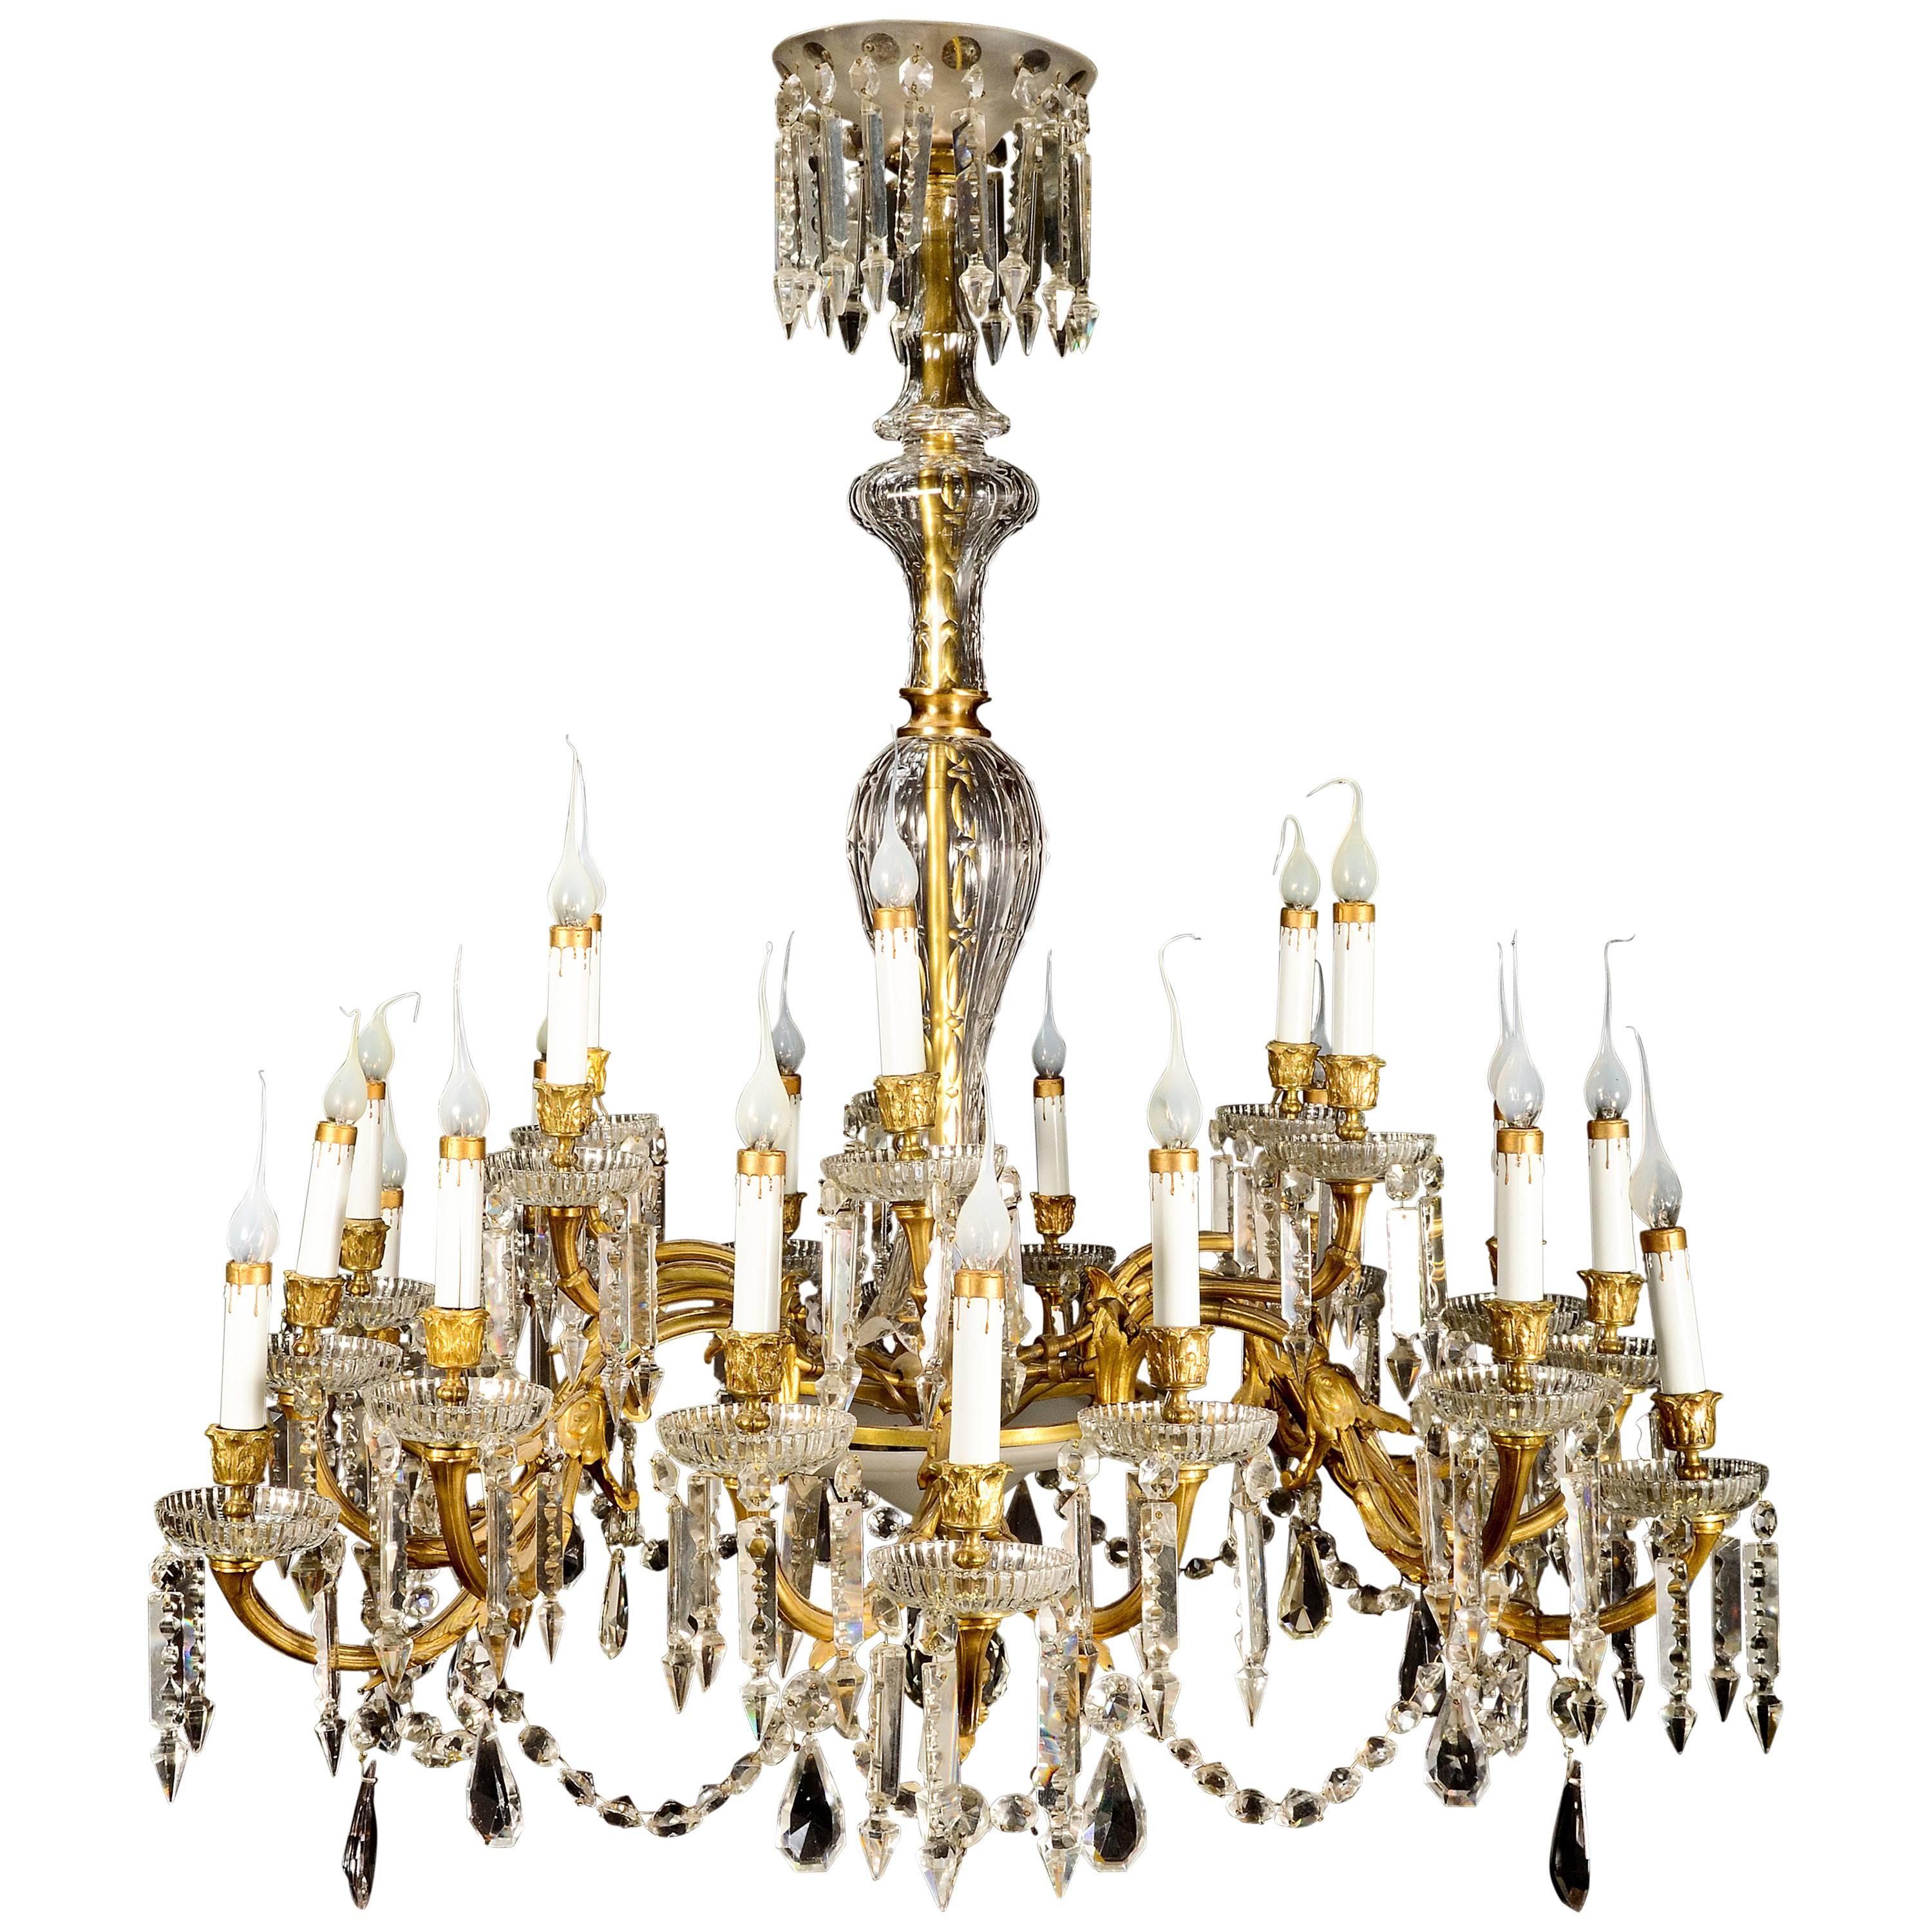 Antique French Louis XVI Style Gilt Bronze and Crystal 24-Arm Chandelier For Sale